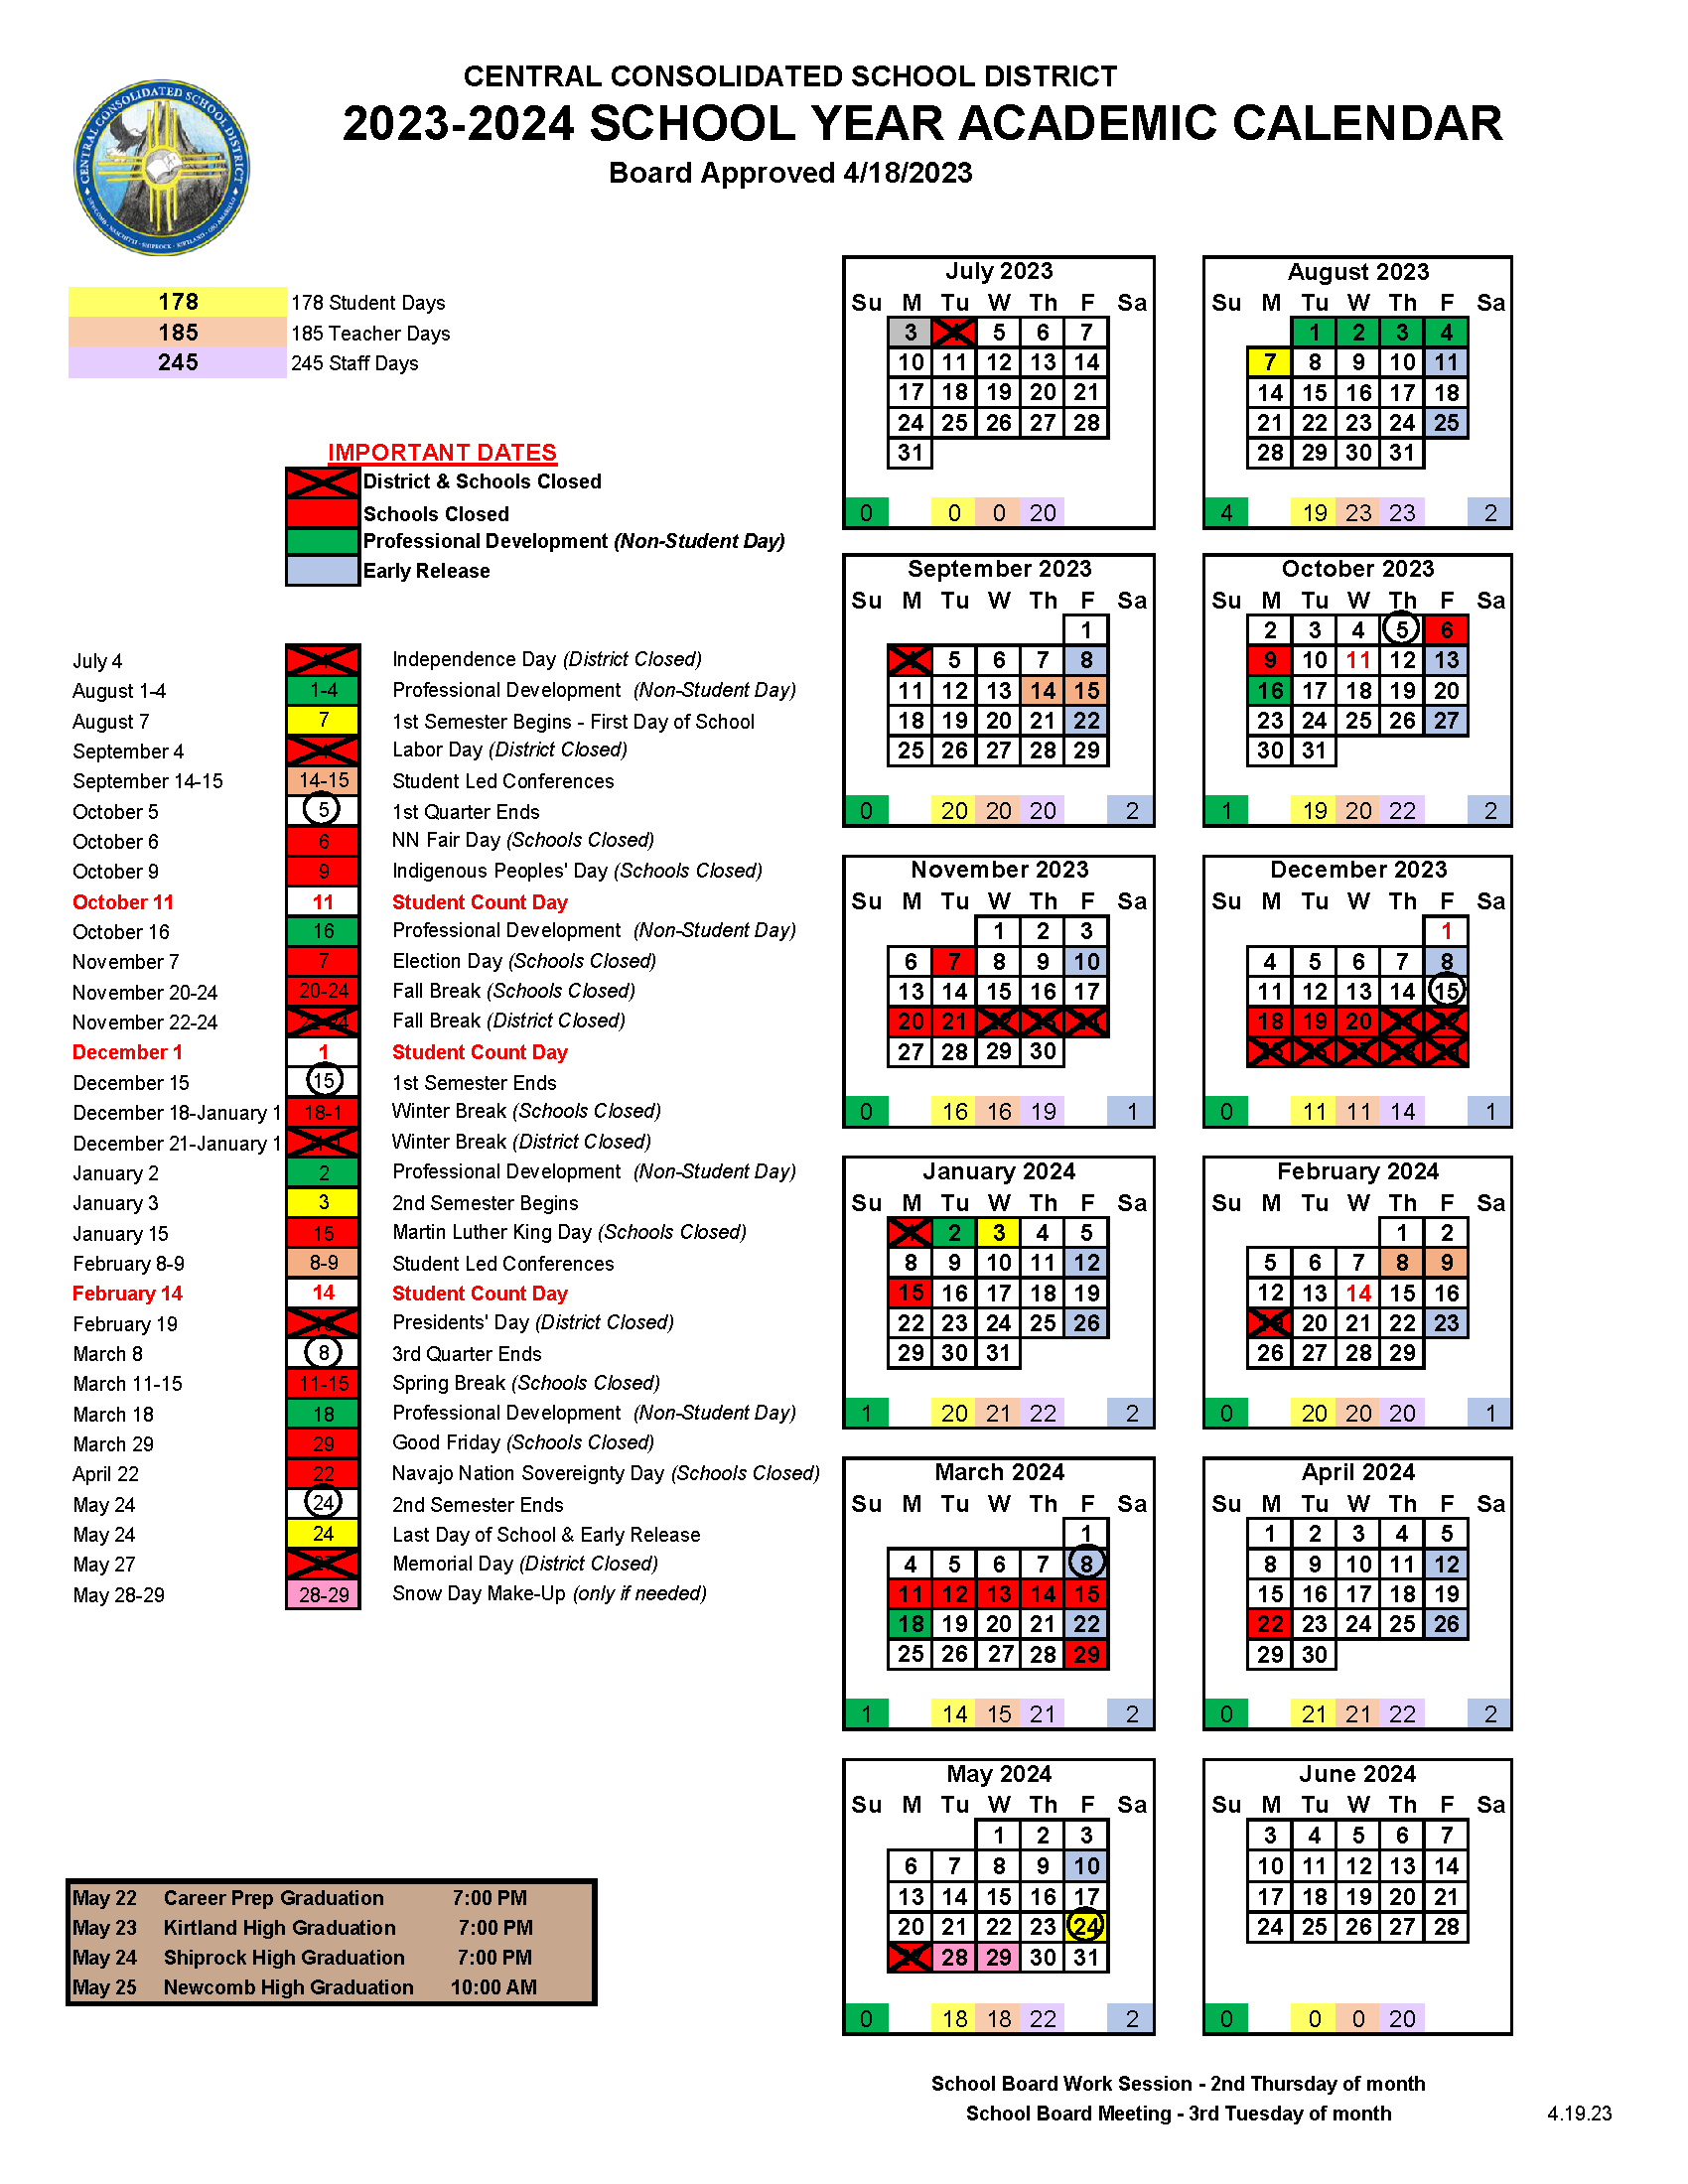 Central Consolidated School District Calendar 2024